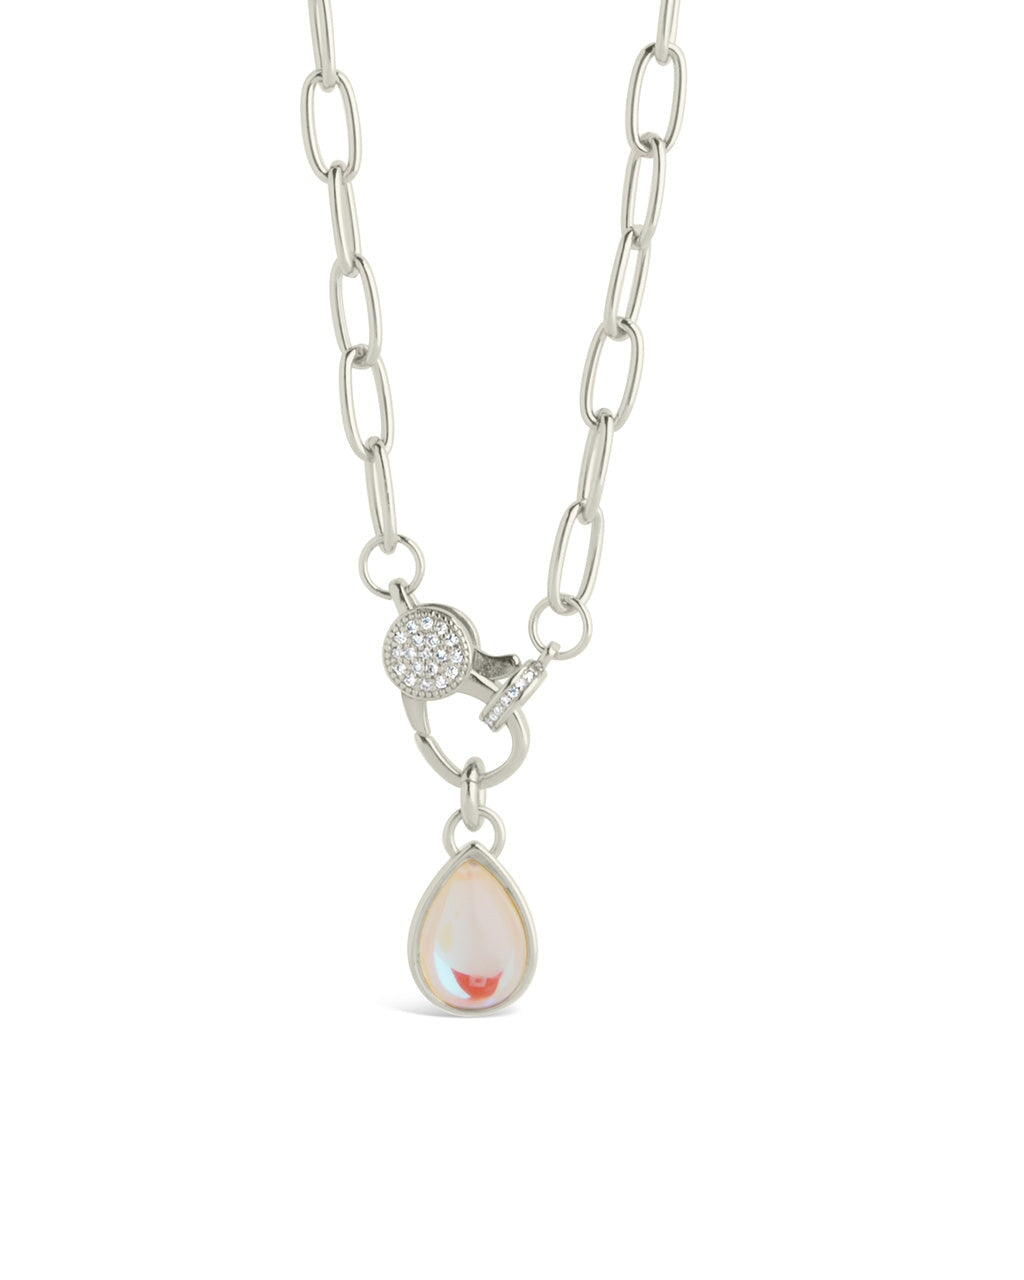 Tay Moonstone Charm & Chain Necklace Necklace Sterling Forever Silver 